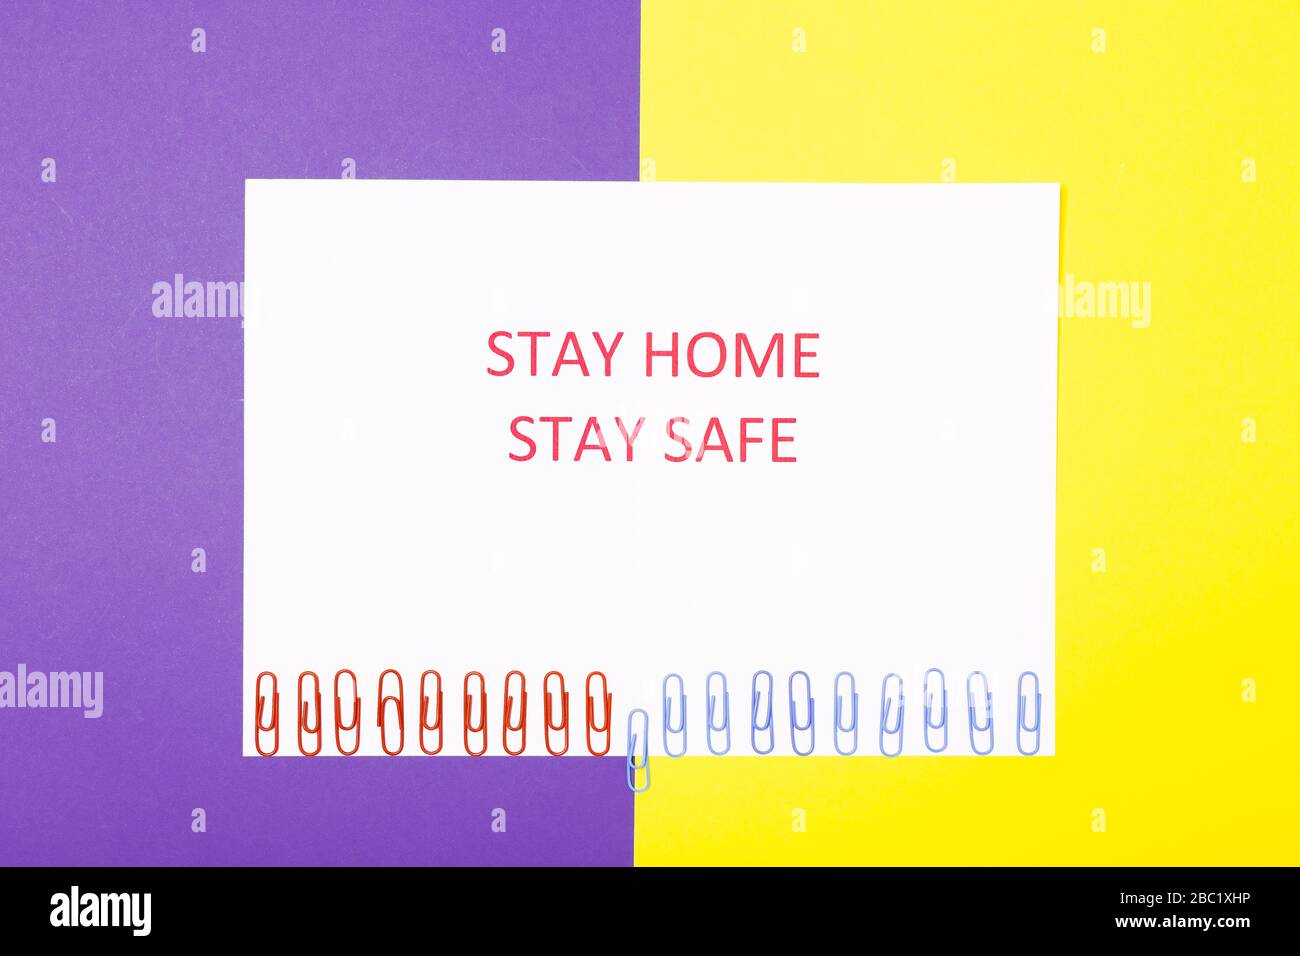 Pandemic Protection Concept. Words stay at home. Minimal concept. Stay safe, how to stop coronavirus from spreading. Social Distancing wording. Stock Photo